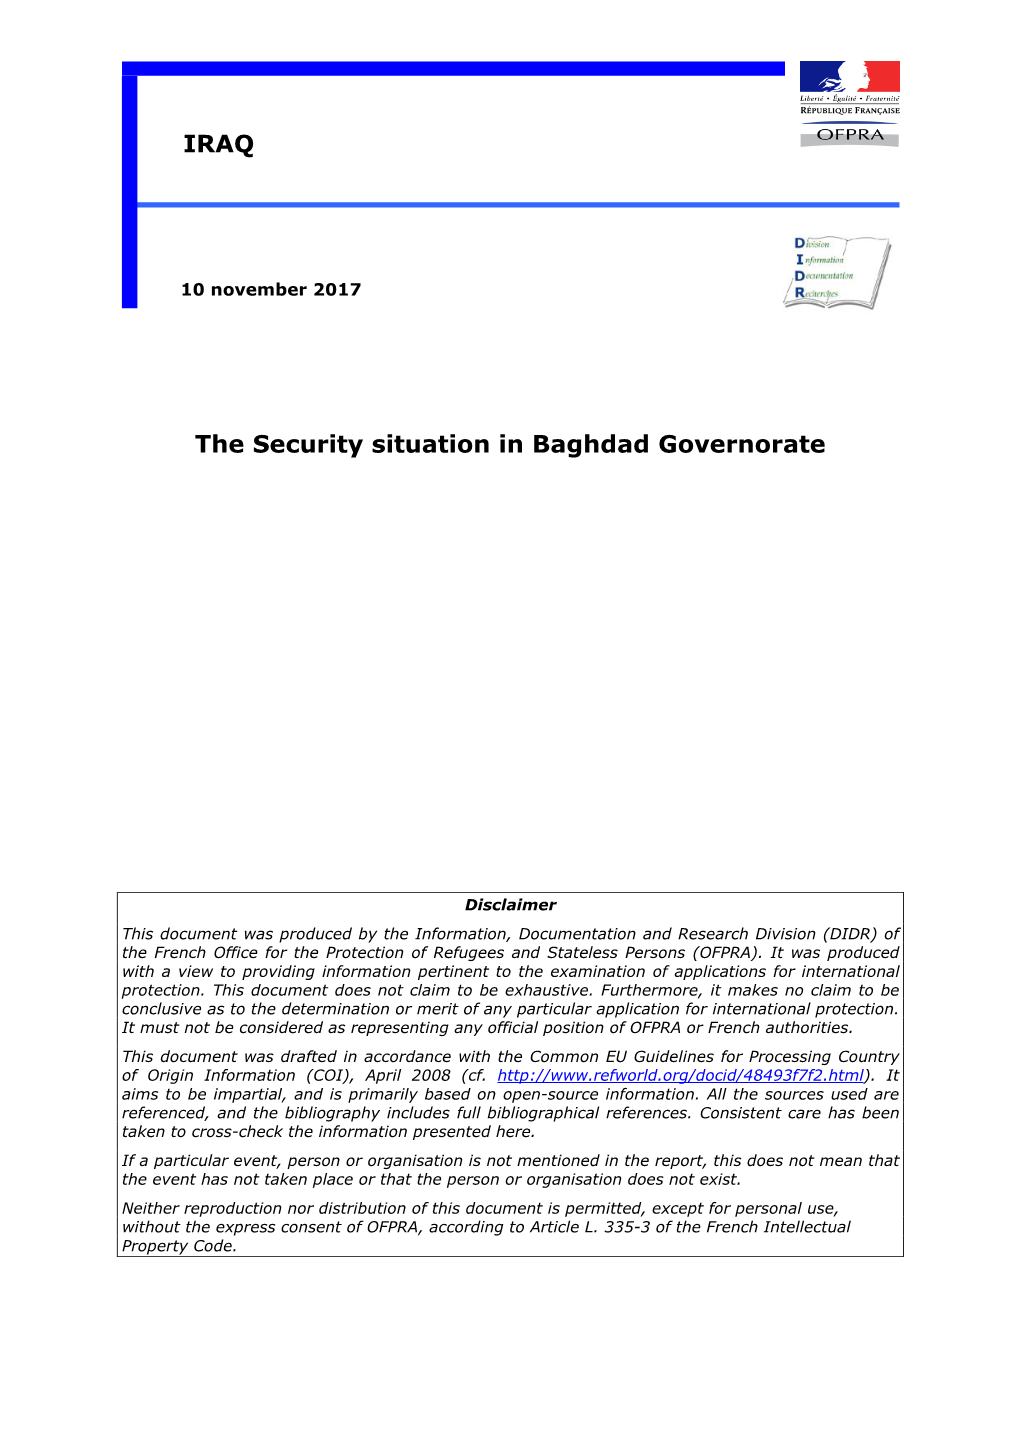 The Security Situation in Baghdad Governorate IRAQ